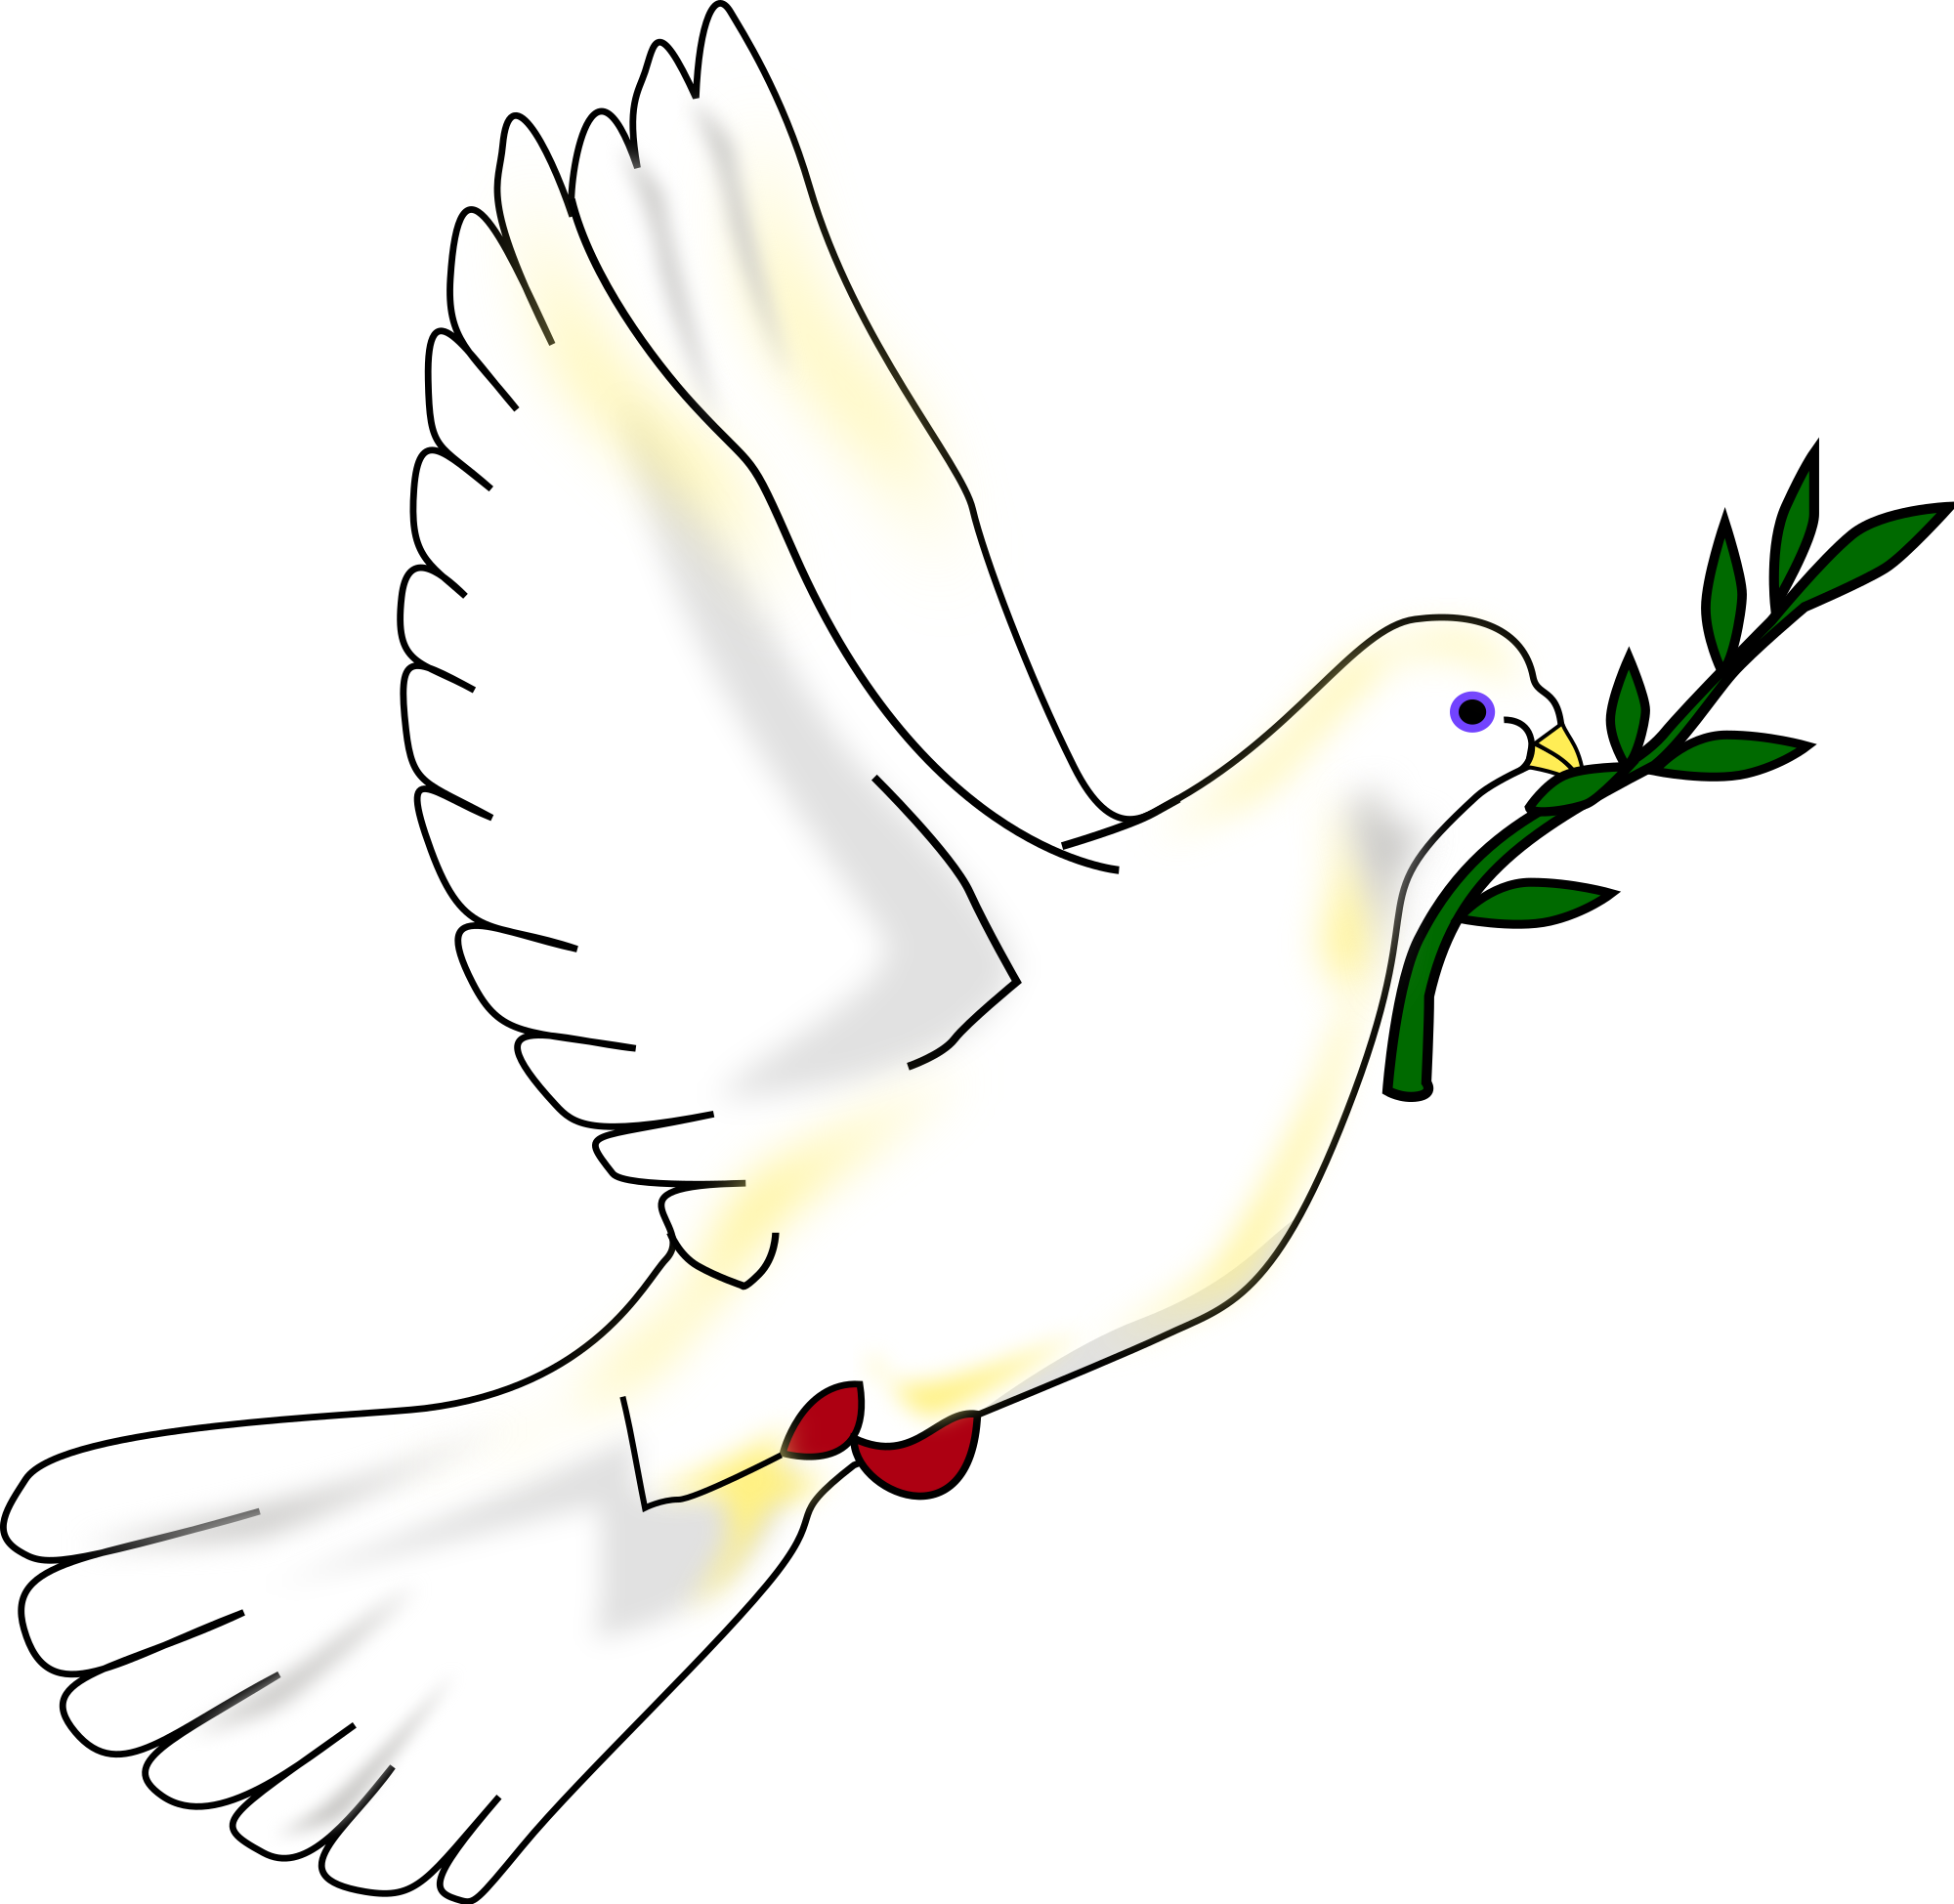 Dove shop of library. Pigeon clipart pigeon peace